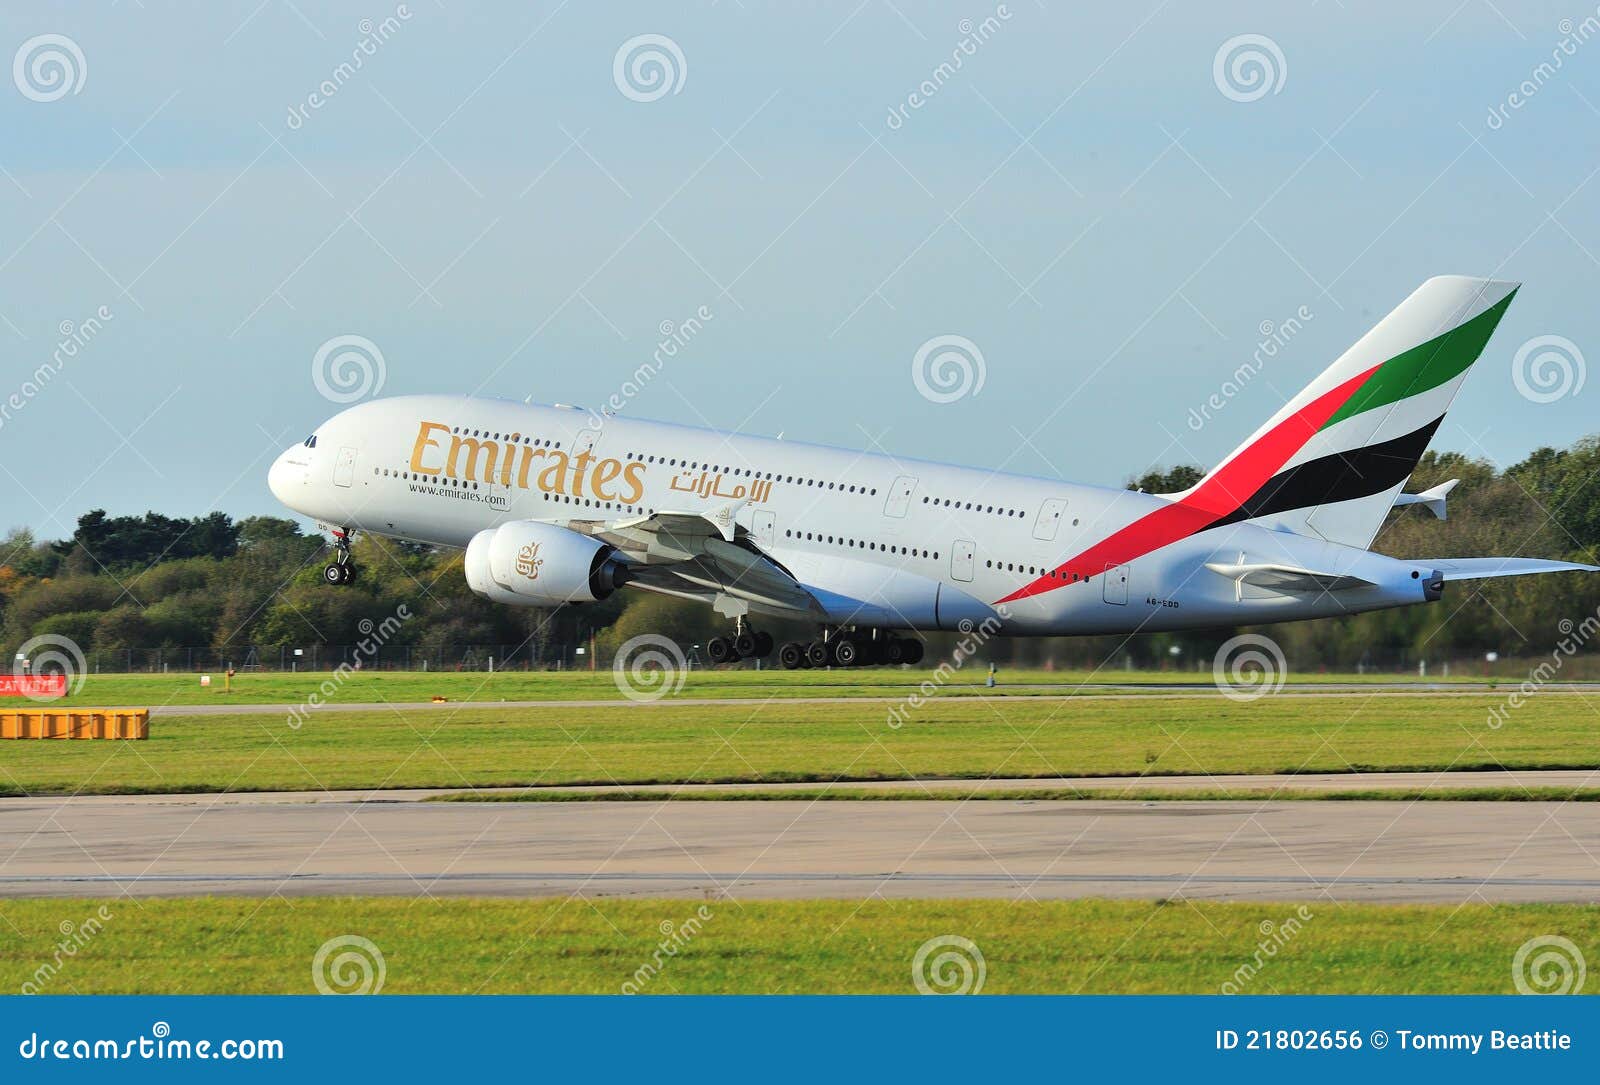 Emirates Airbus A380 Four Engined Large Passenger Aircraft Taking Off ...